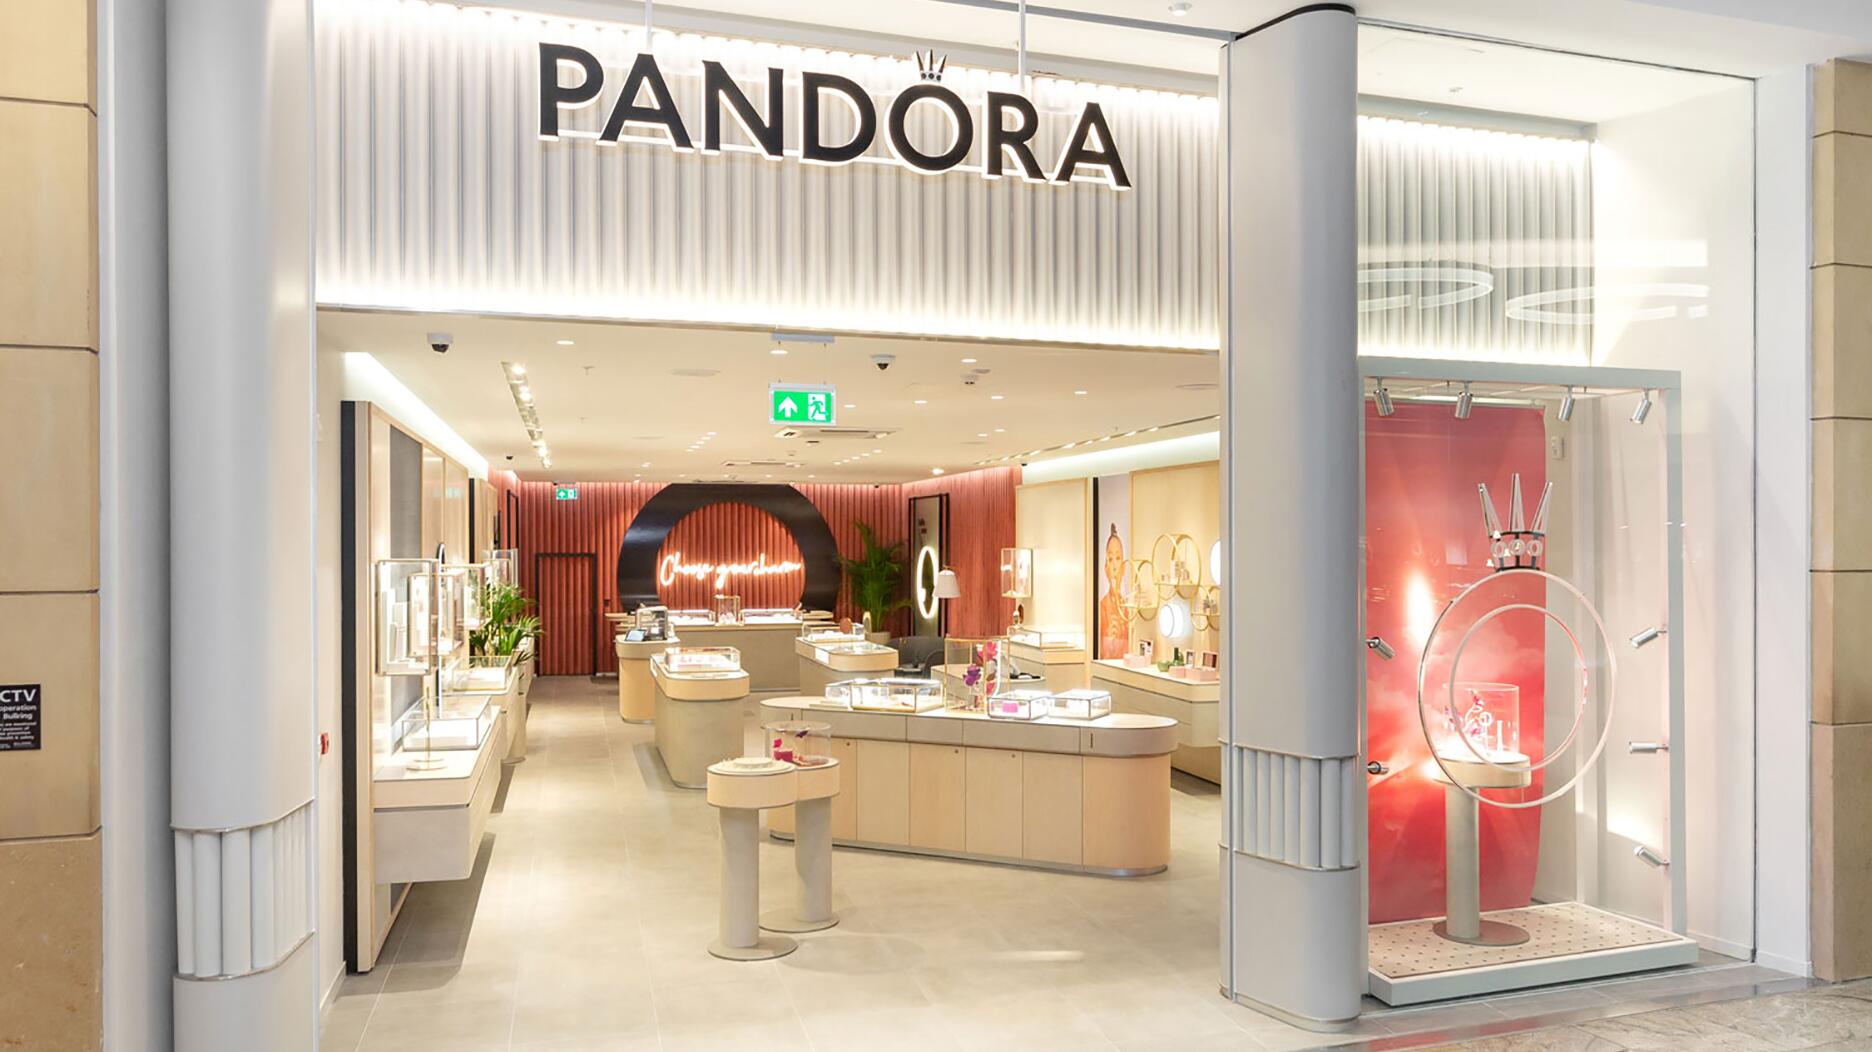 Pandora Leads Jewelry Industry, According To New Research